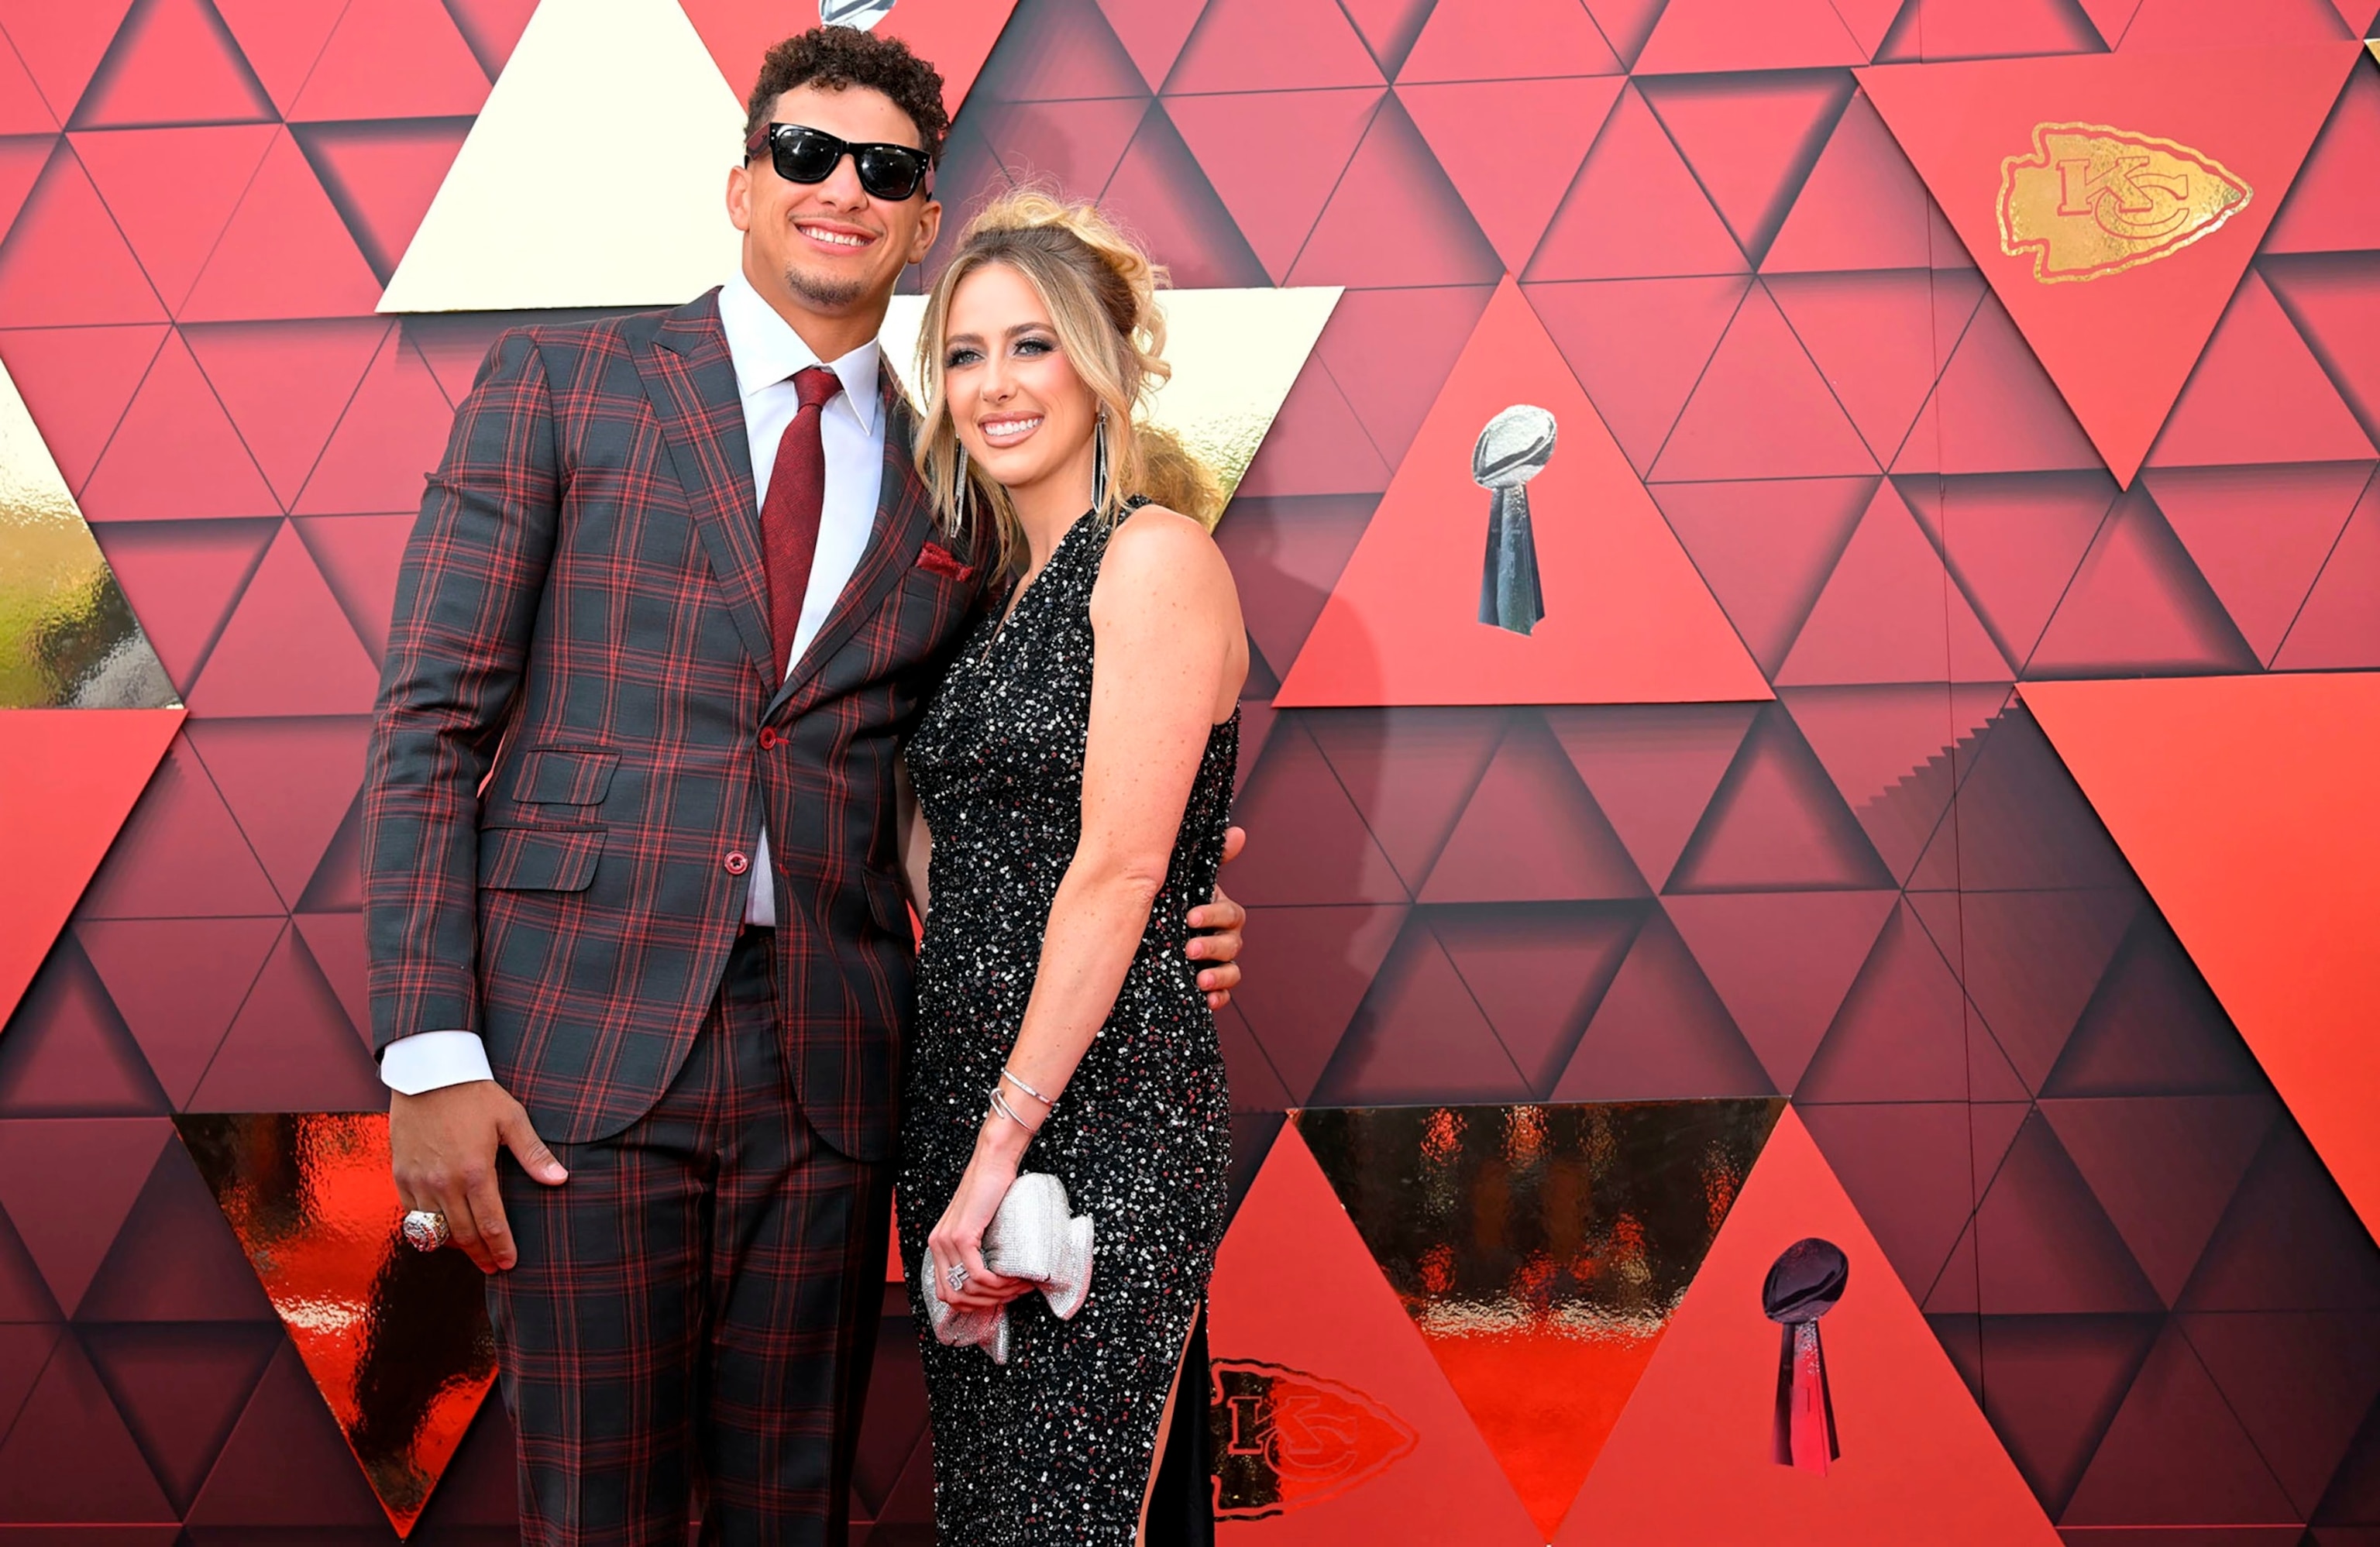 PHOTO: Kansas City Chiefs quarterback Patrick Mahomes and his wife, Brittany, on the red carpet at Union Station arriving for the Super Bowl LVII championship ring ceremony, June 15, 2023, in Kansas City, Mo.